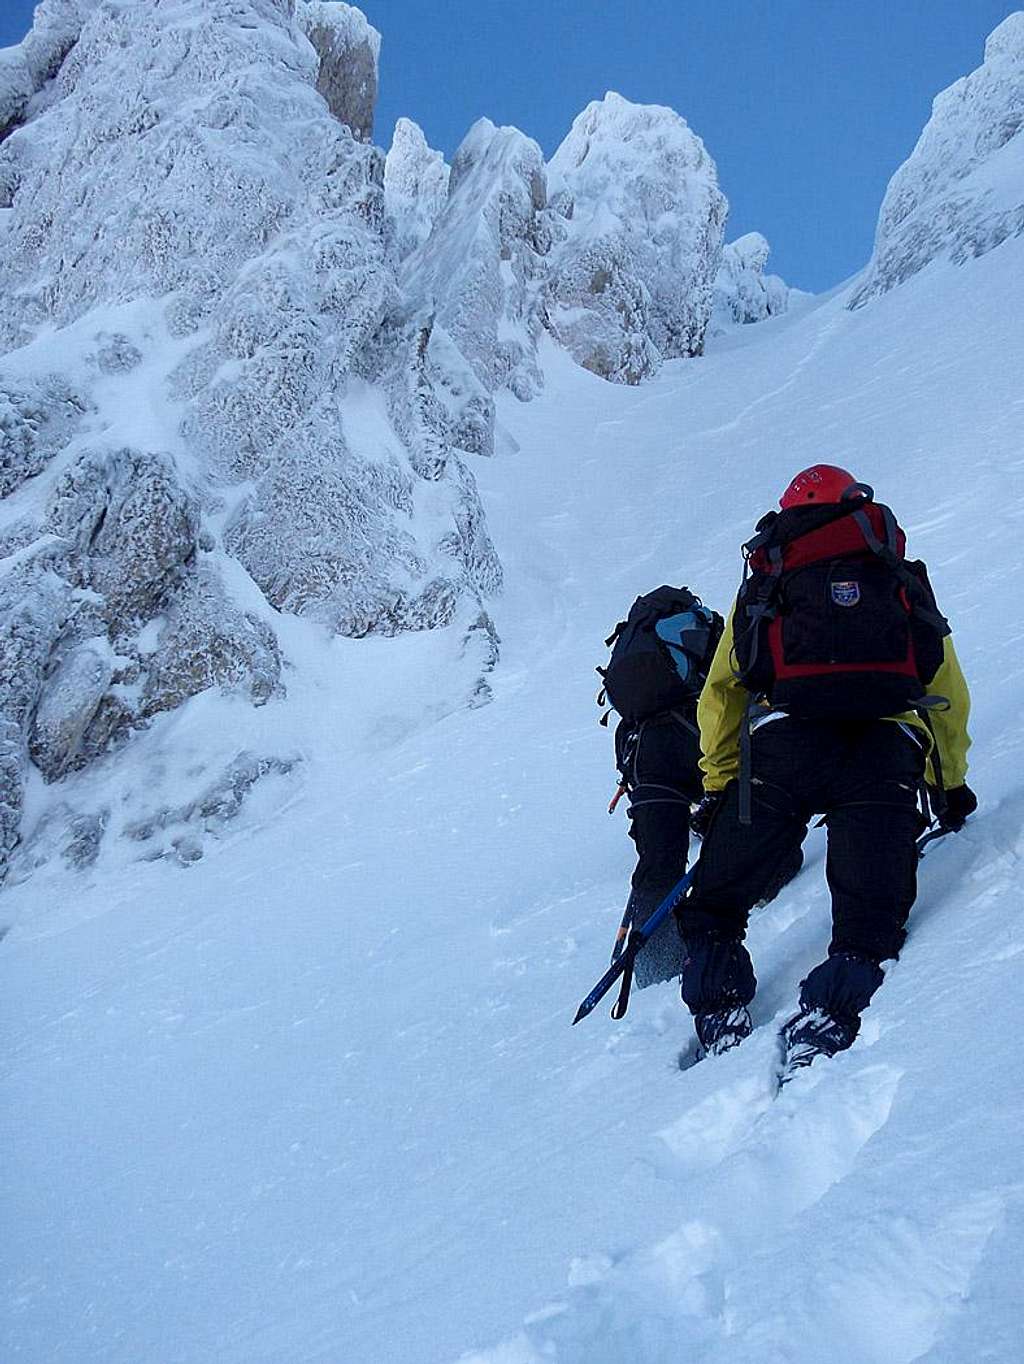 At the bottom of the couloir